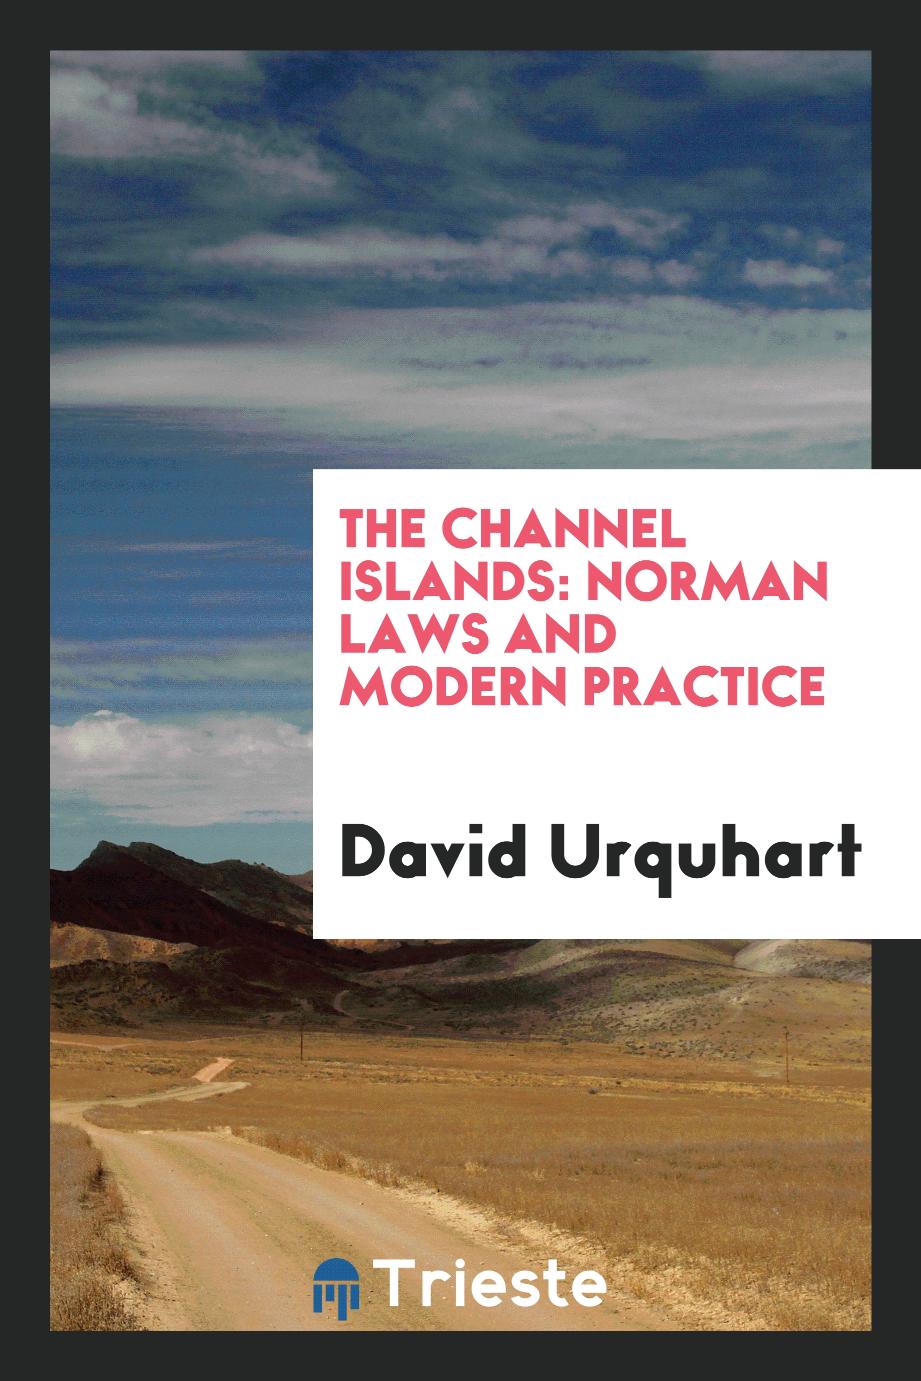 The Channel Islands: Norman laws and modern practice